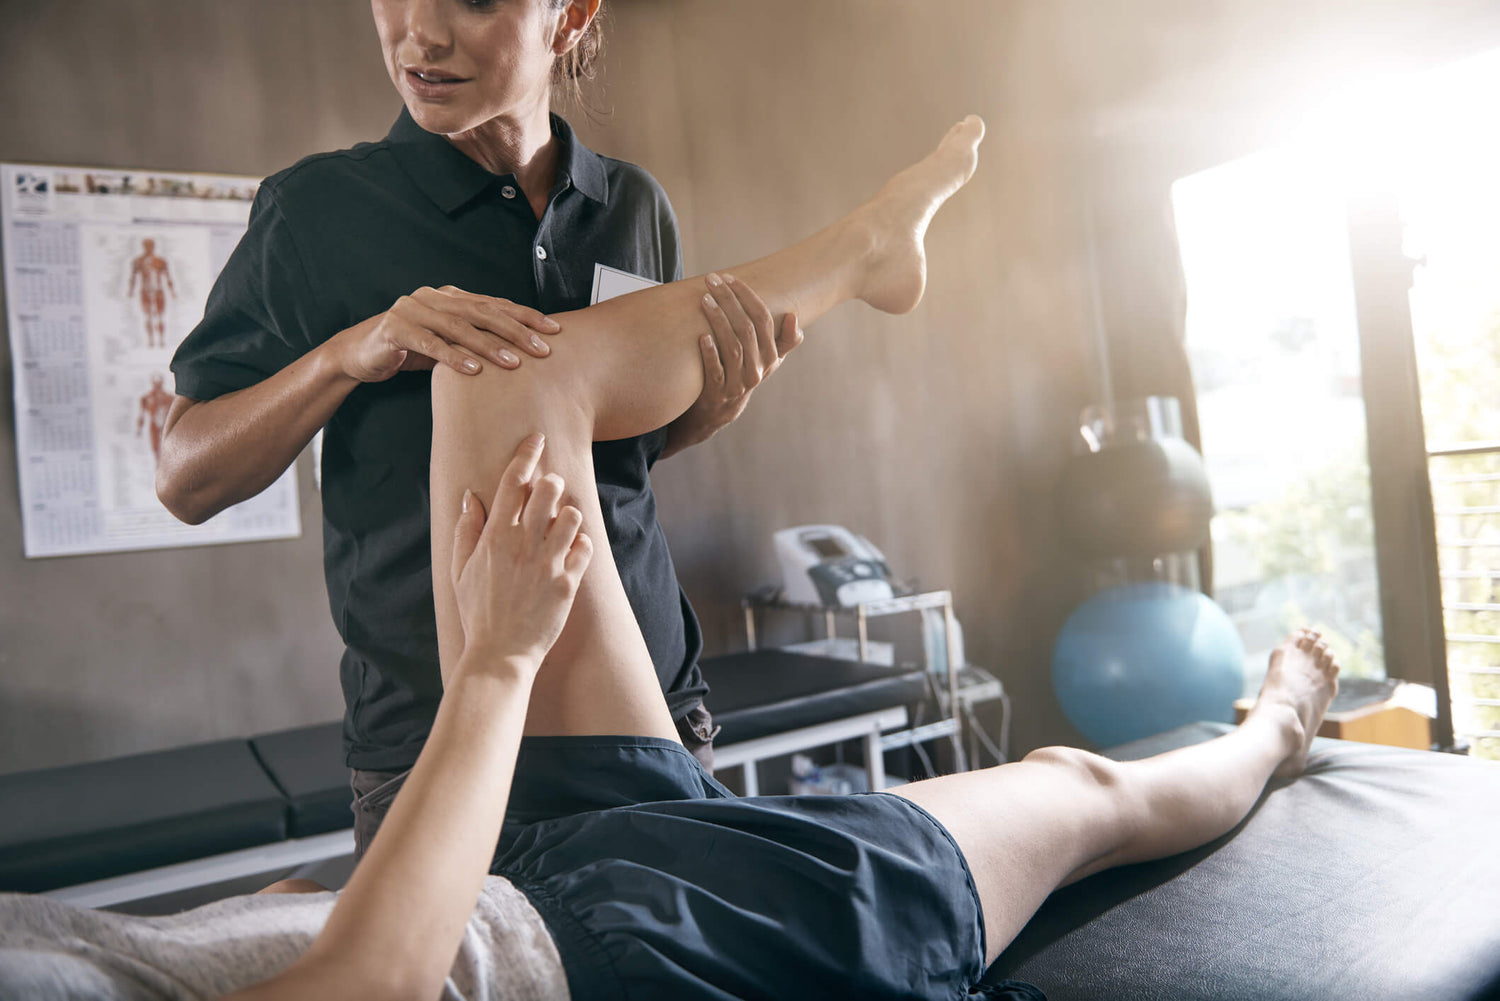 What are the latest emerging trends in physiotherapy?